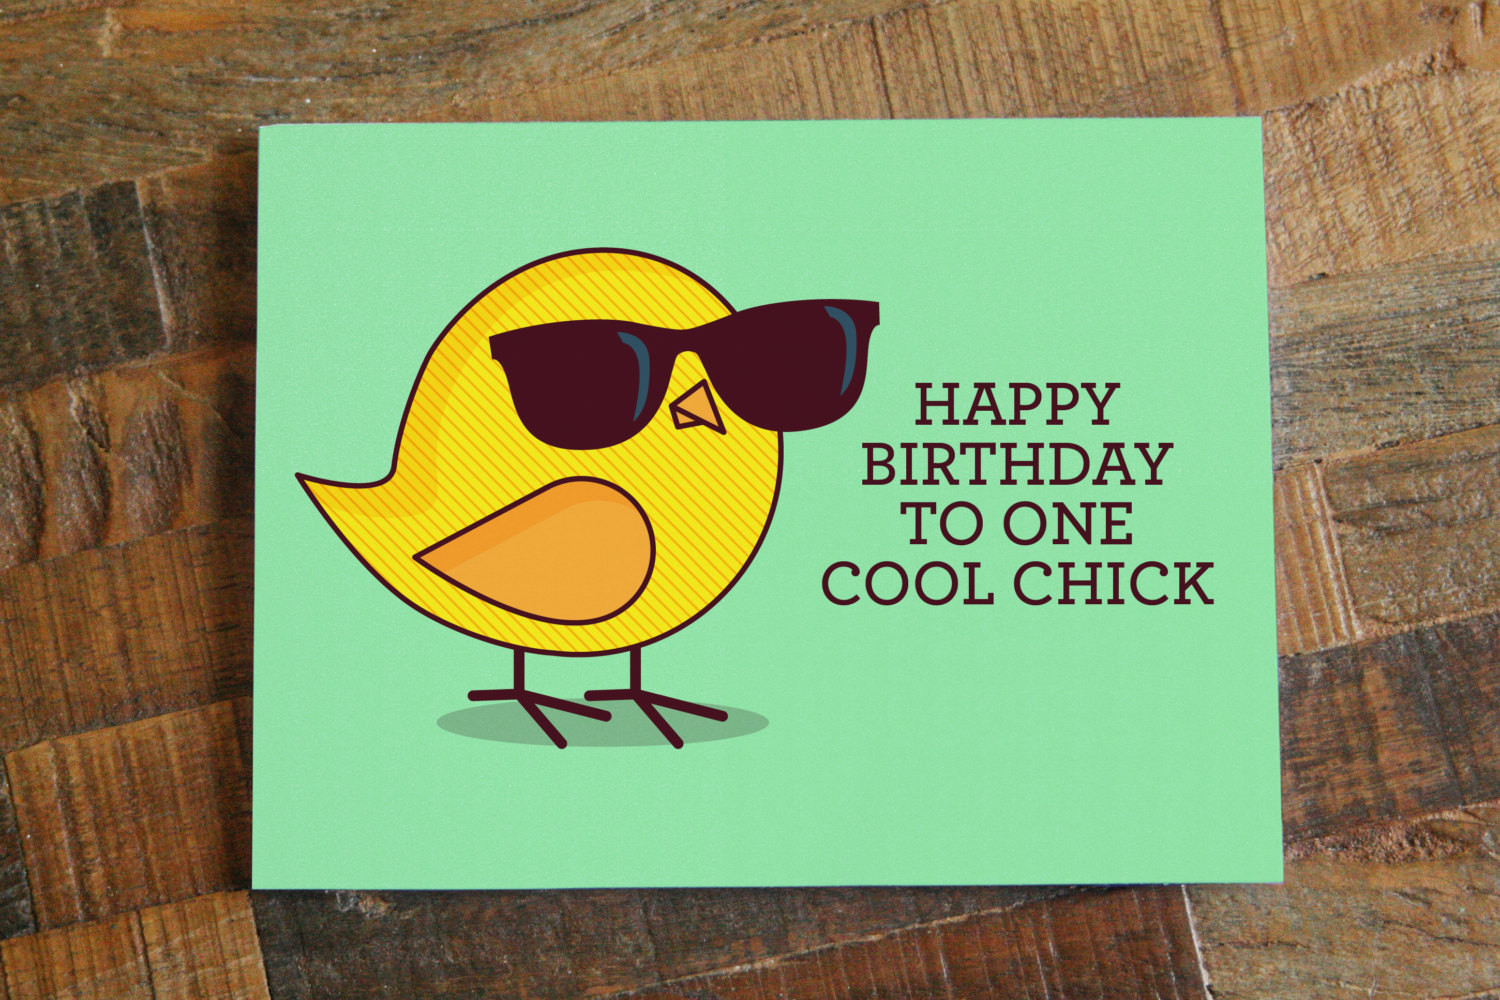 Happy Birthday Greetings Funny
 Funny Birthday Card For Her Happy Birthday to e Cool